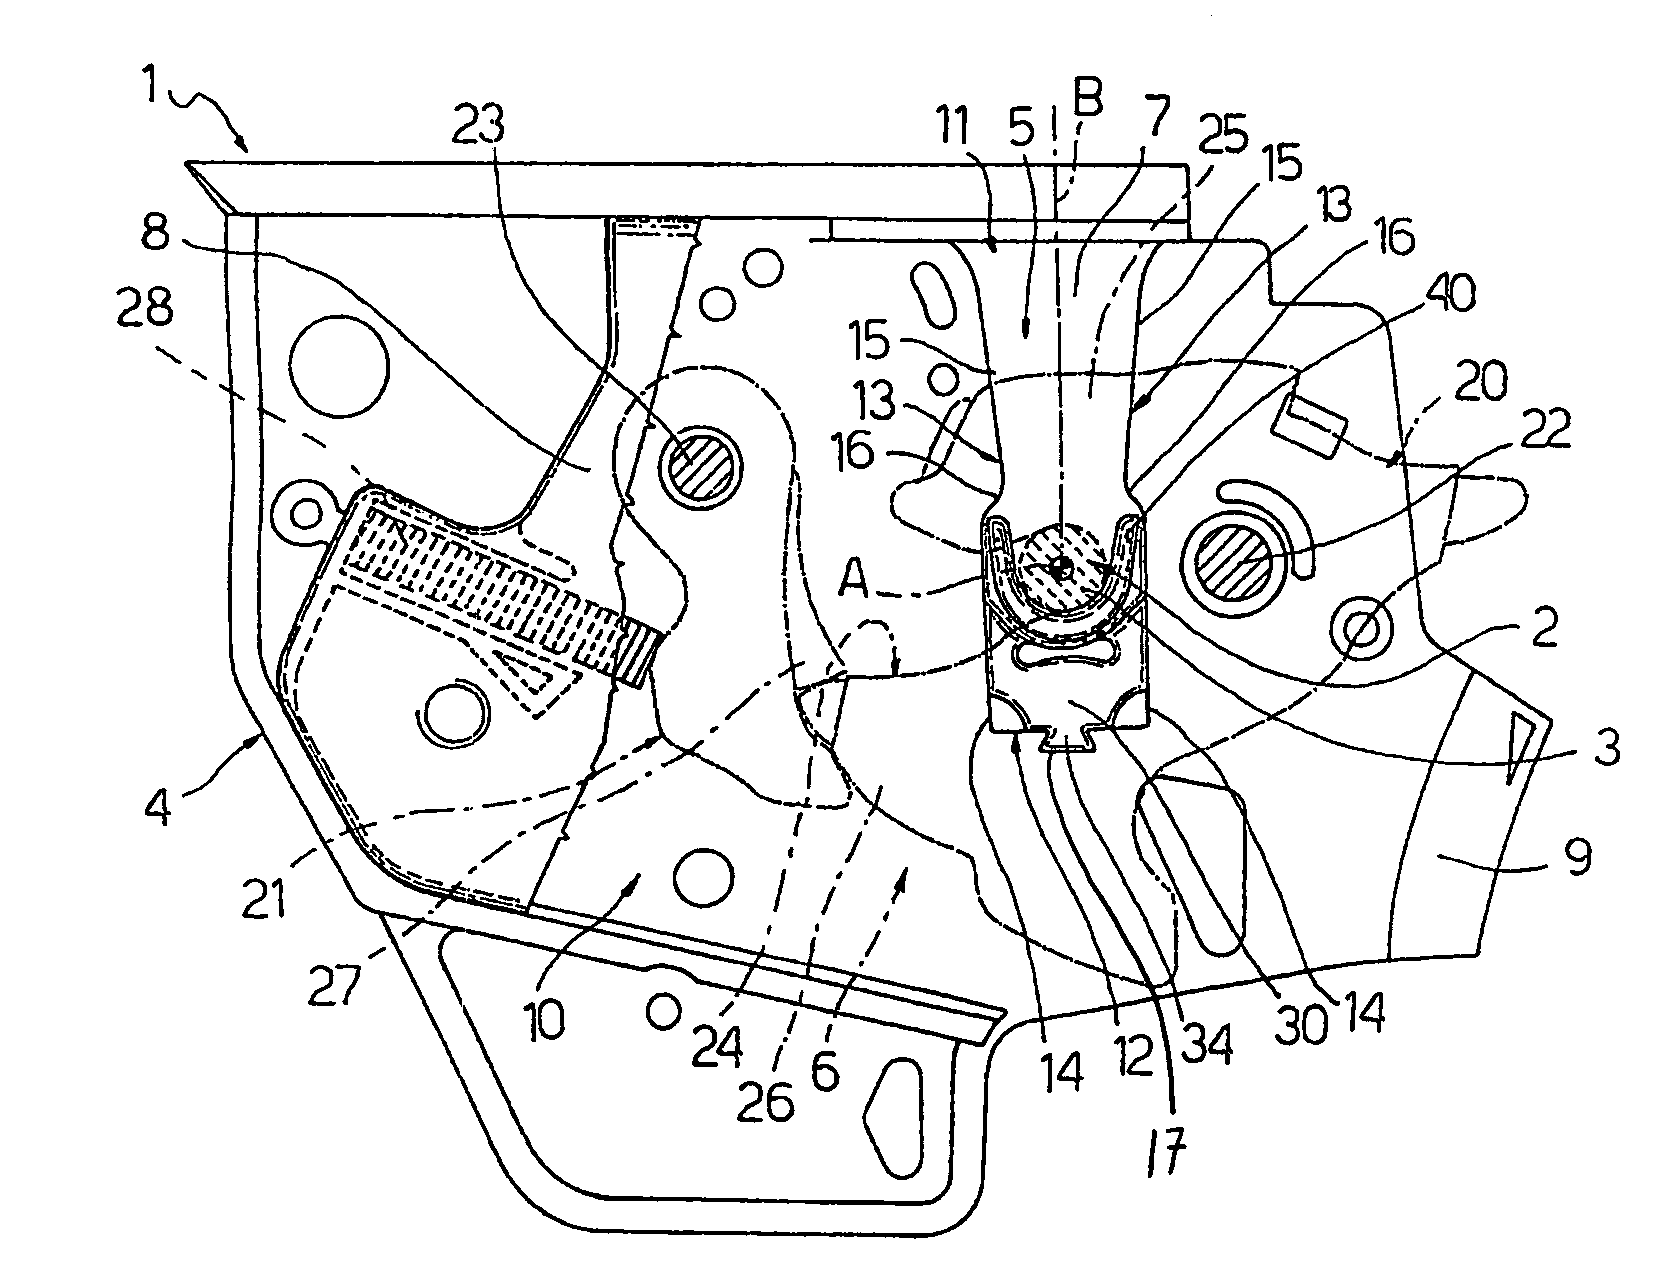 Lock for a door of a motor vehicle